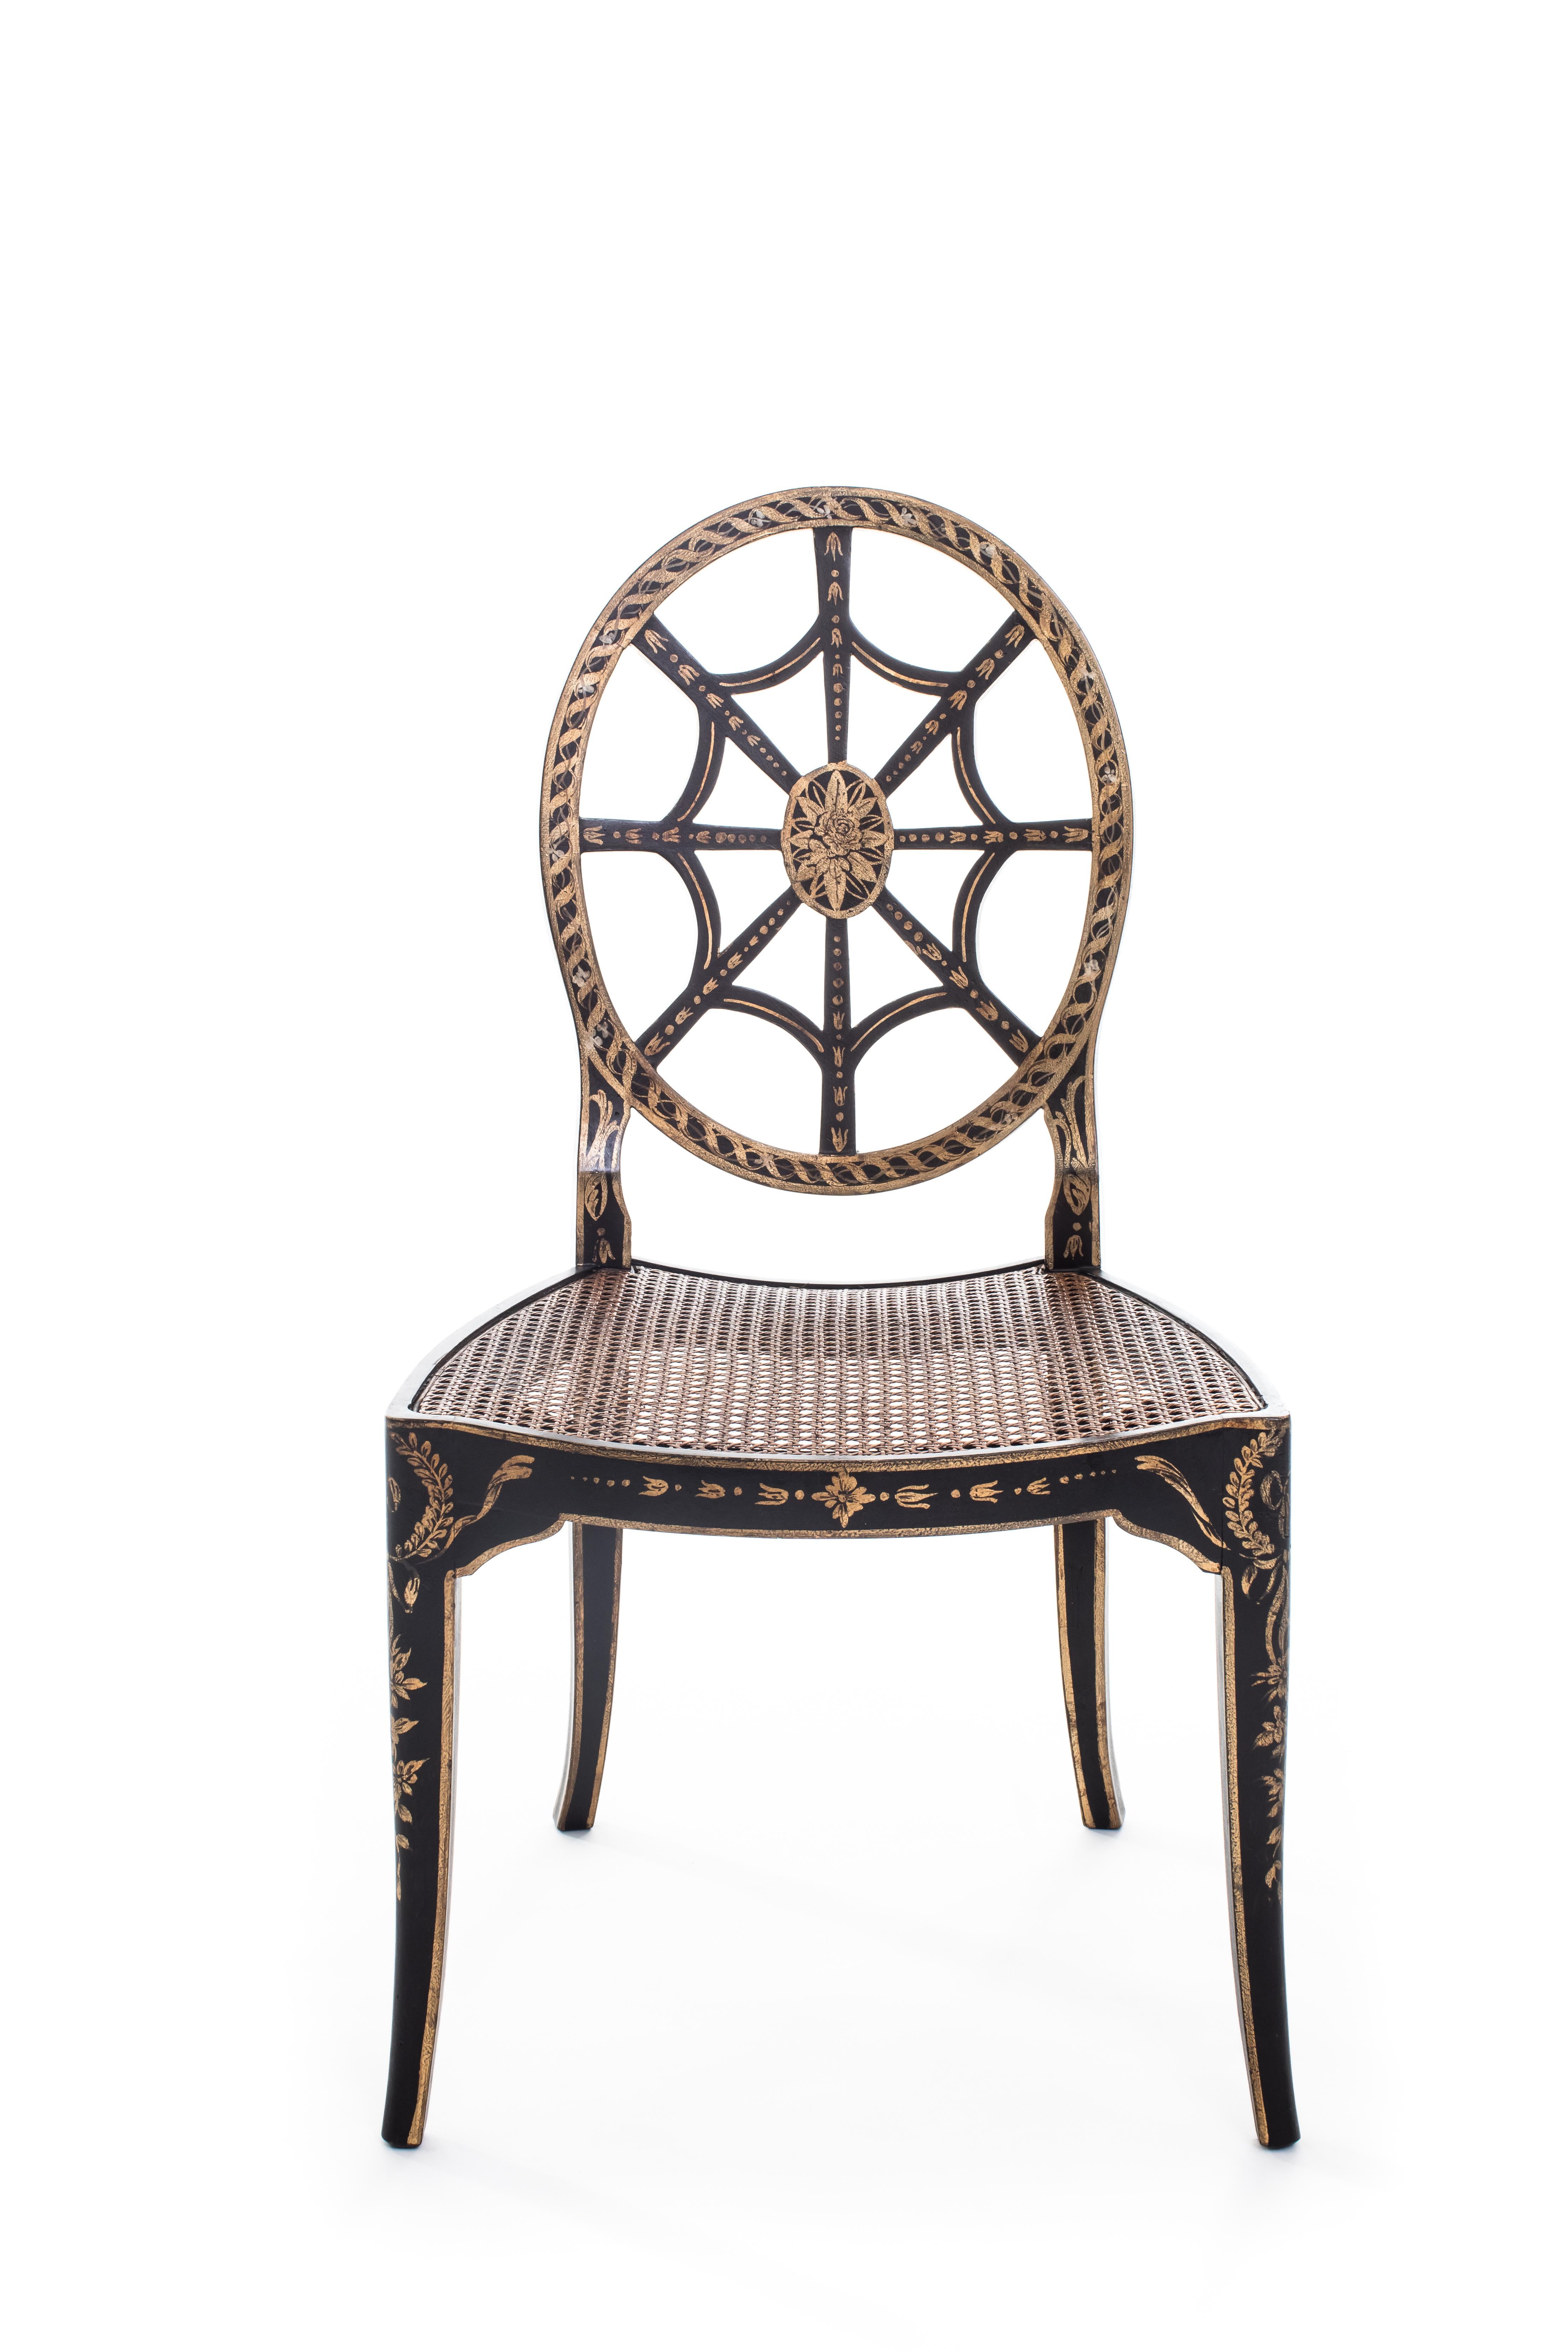 From our hand-painted Furniture Collection, we are pleased to introduce you to our Aquileia Chair with Cane Seat.
We’re pretty sure you already know the city of Rome, but you might not be familiar with Aquileia! This small village and